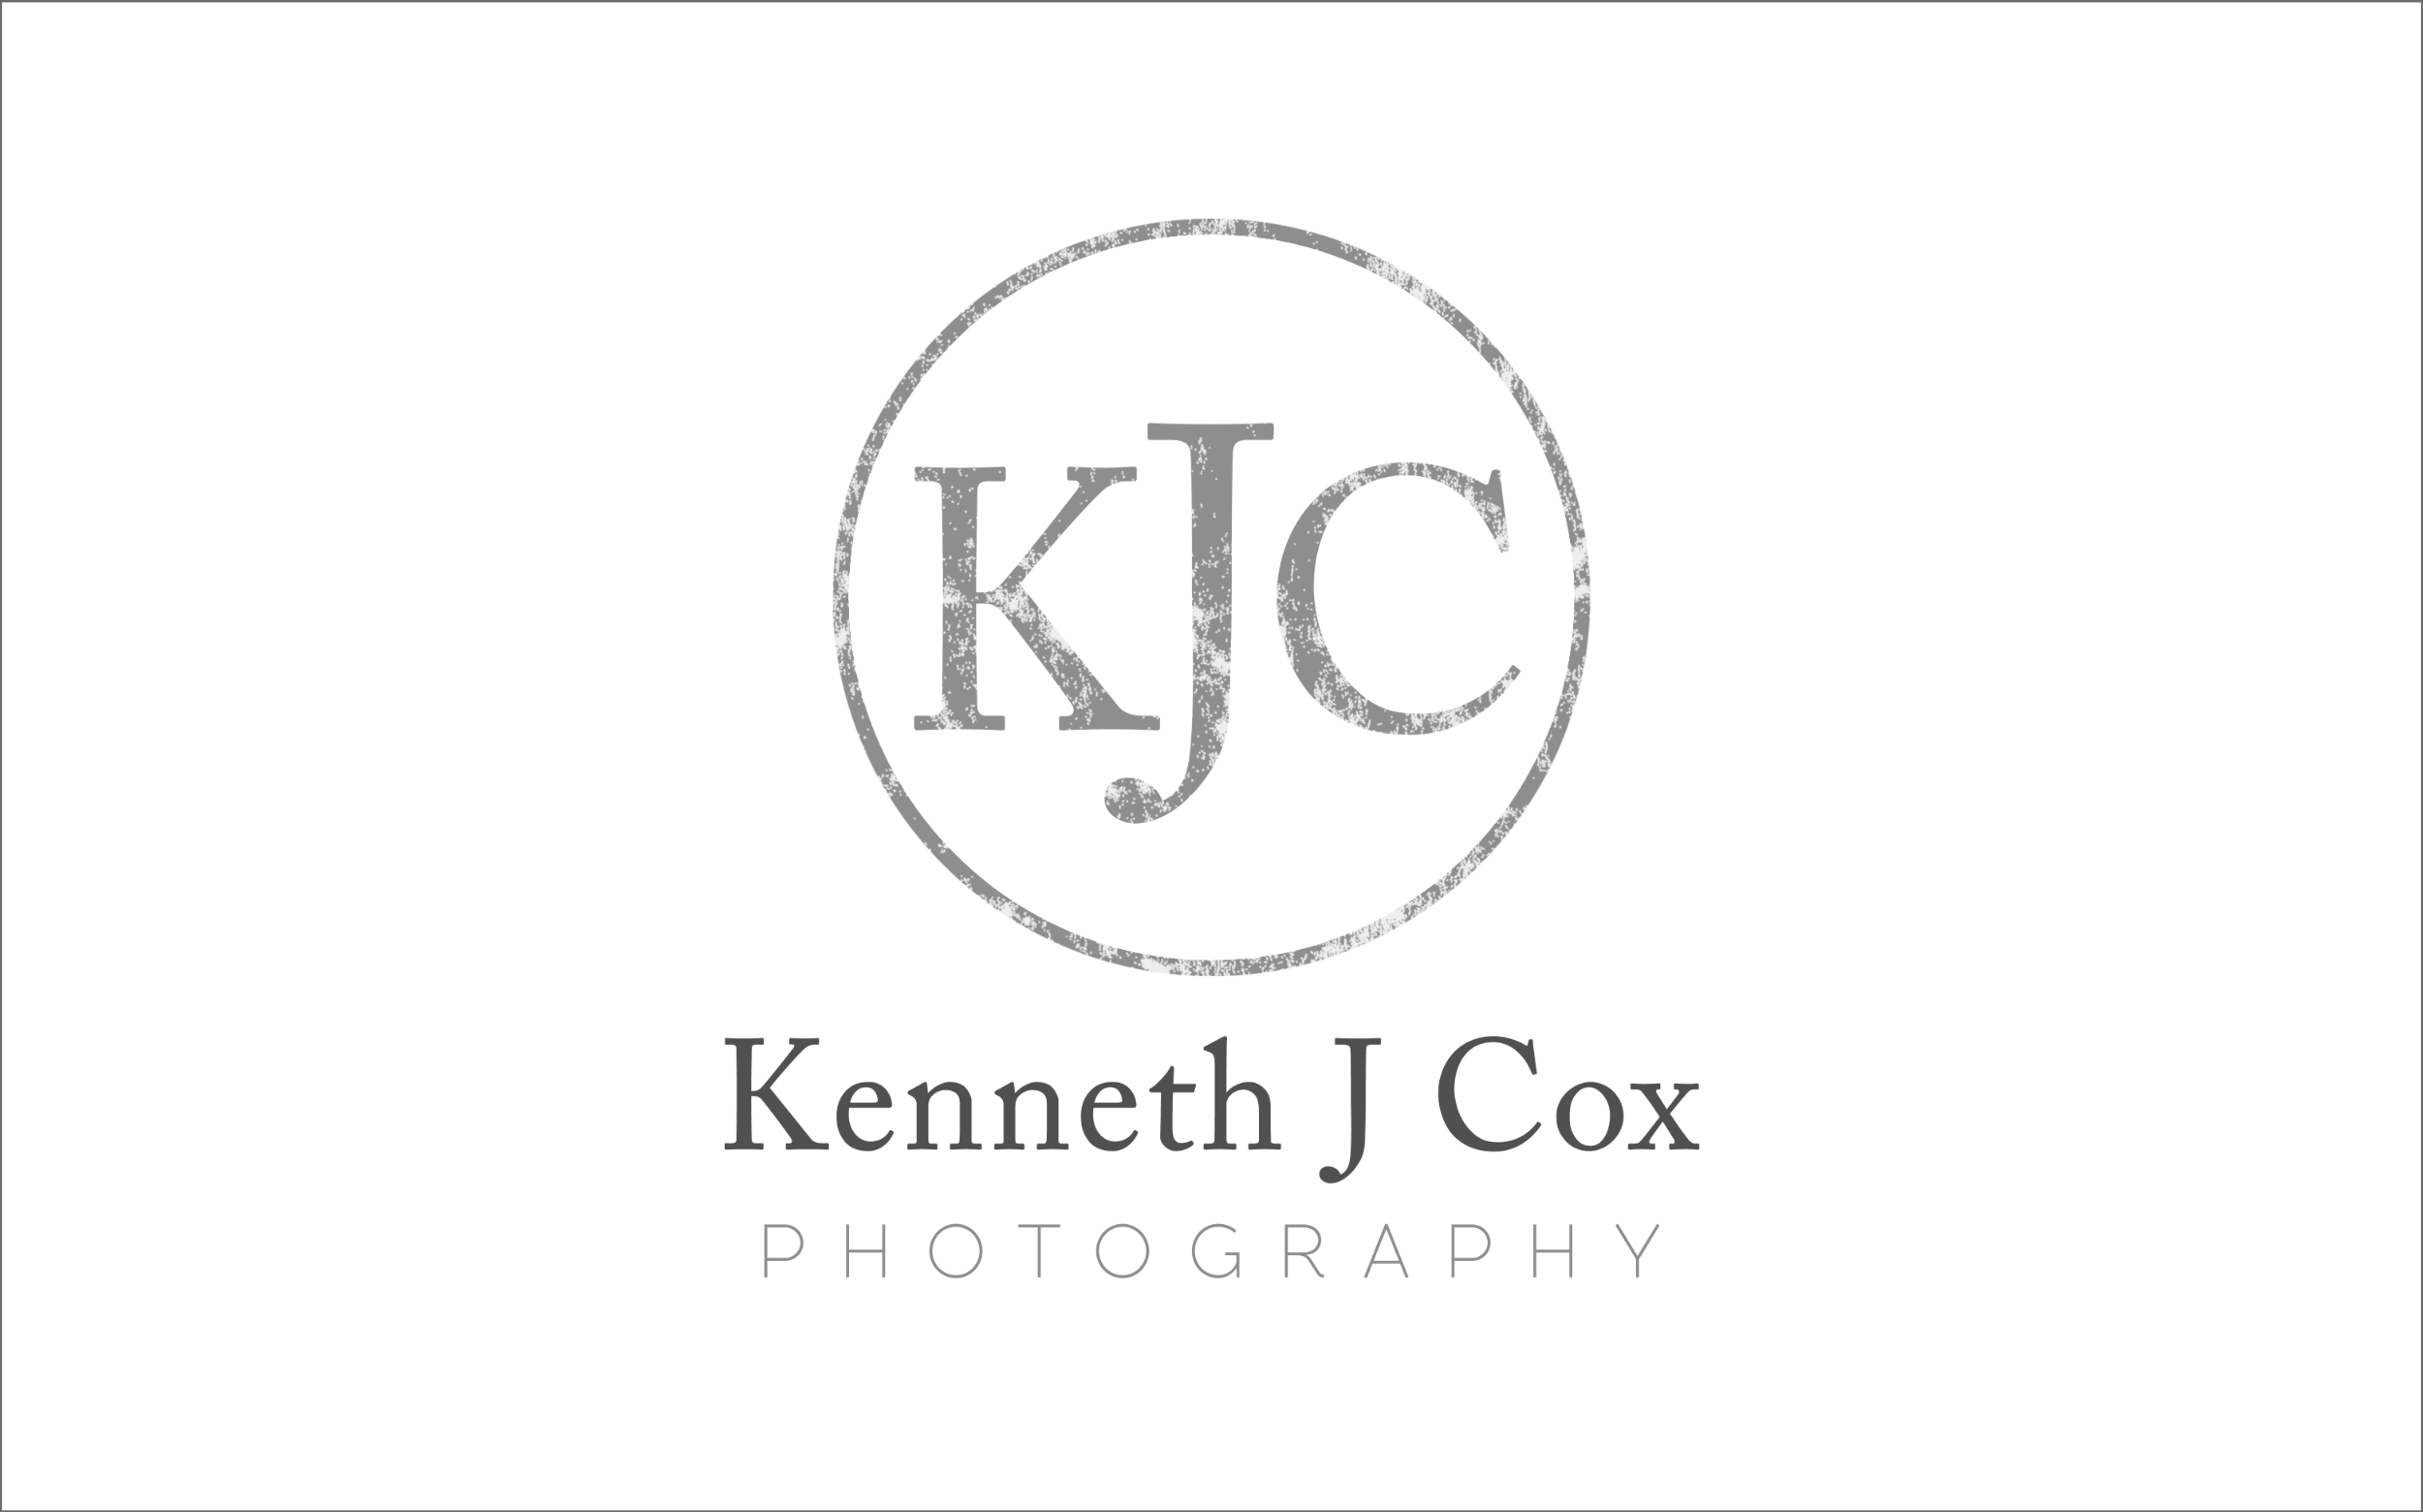 Logo Design for Ken Cox Photography.  Made by Jon Glanville - Plymouth Graphic Designer.